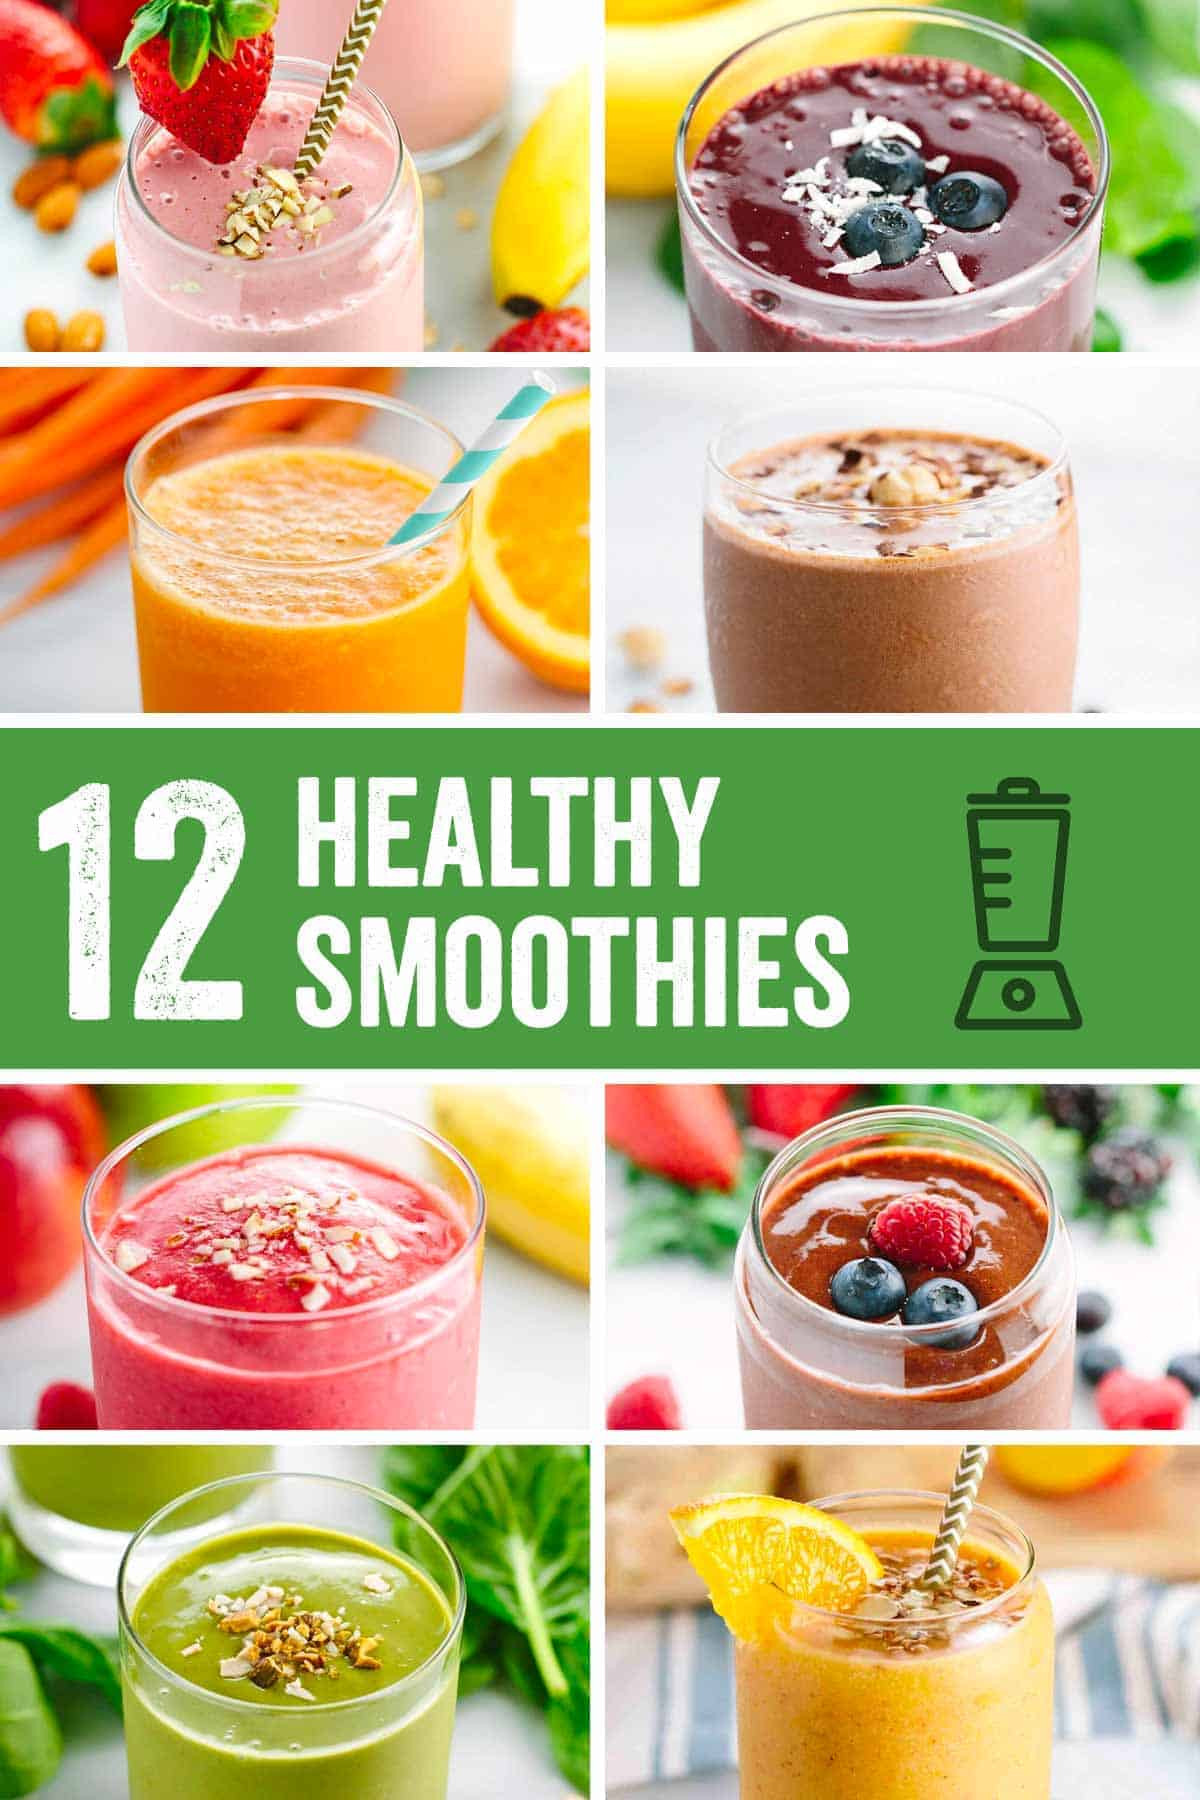 Breakfast Smoothie Recipes
 Roundup Easy Five Minute Healthy Smoothie Recipes